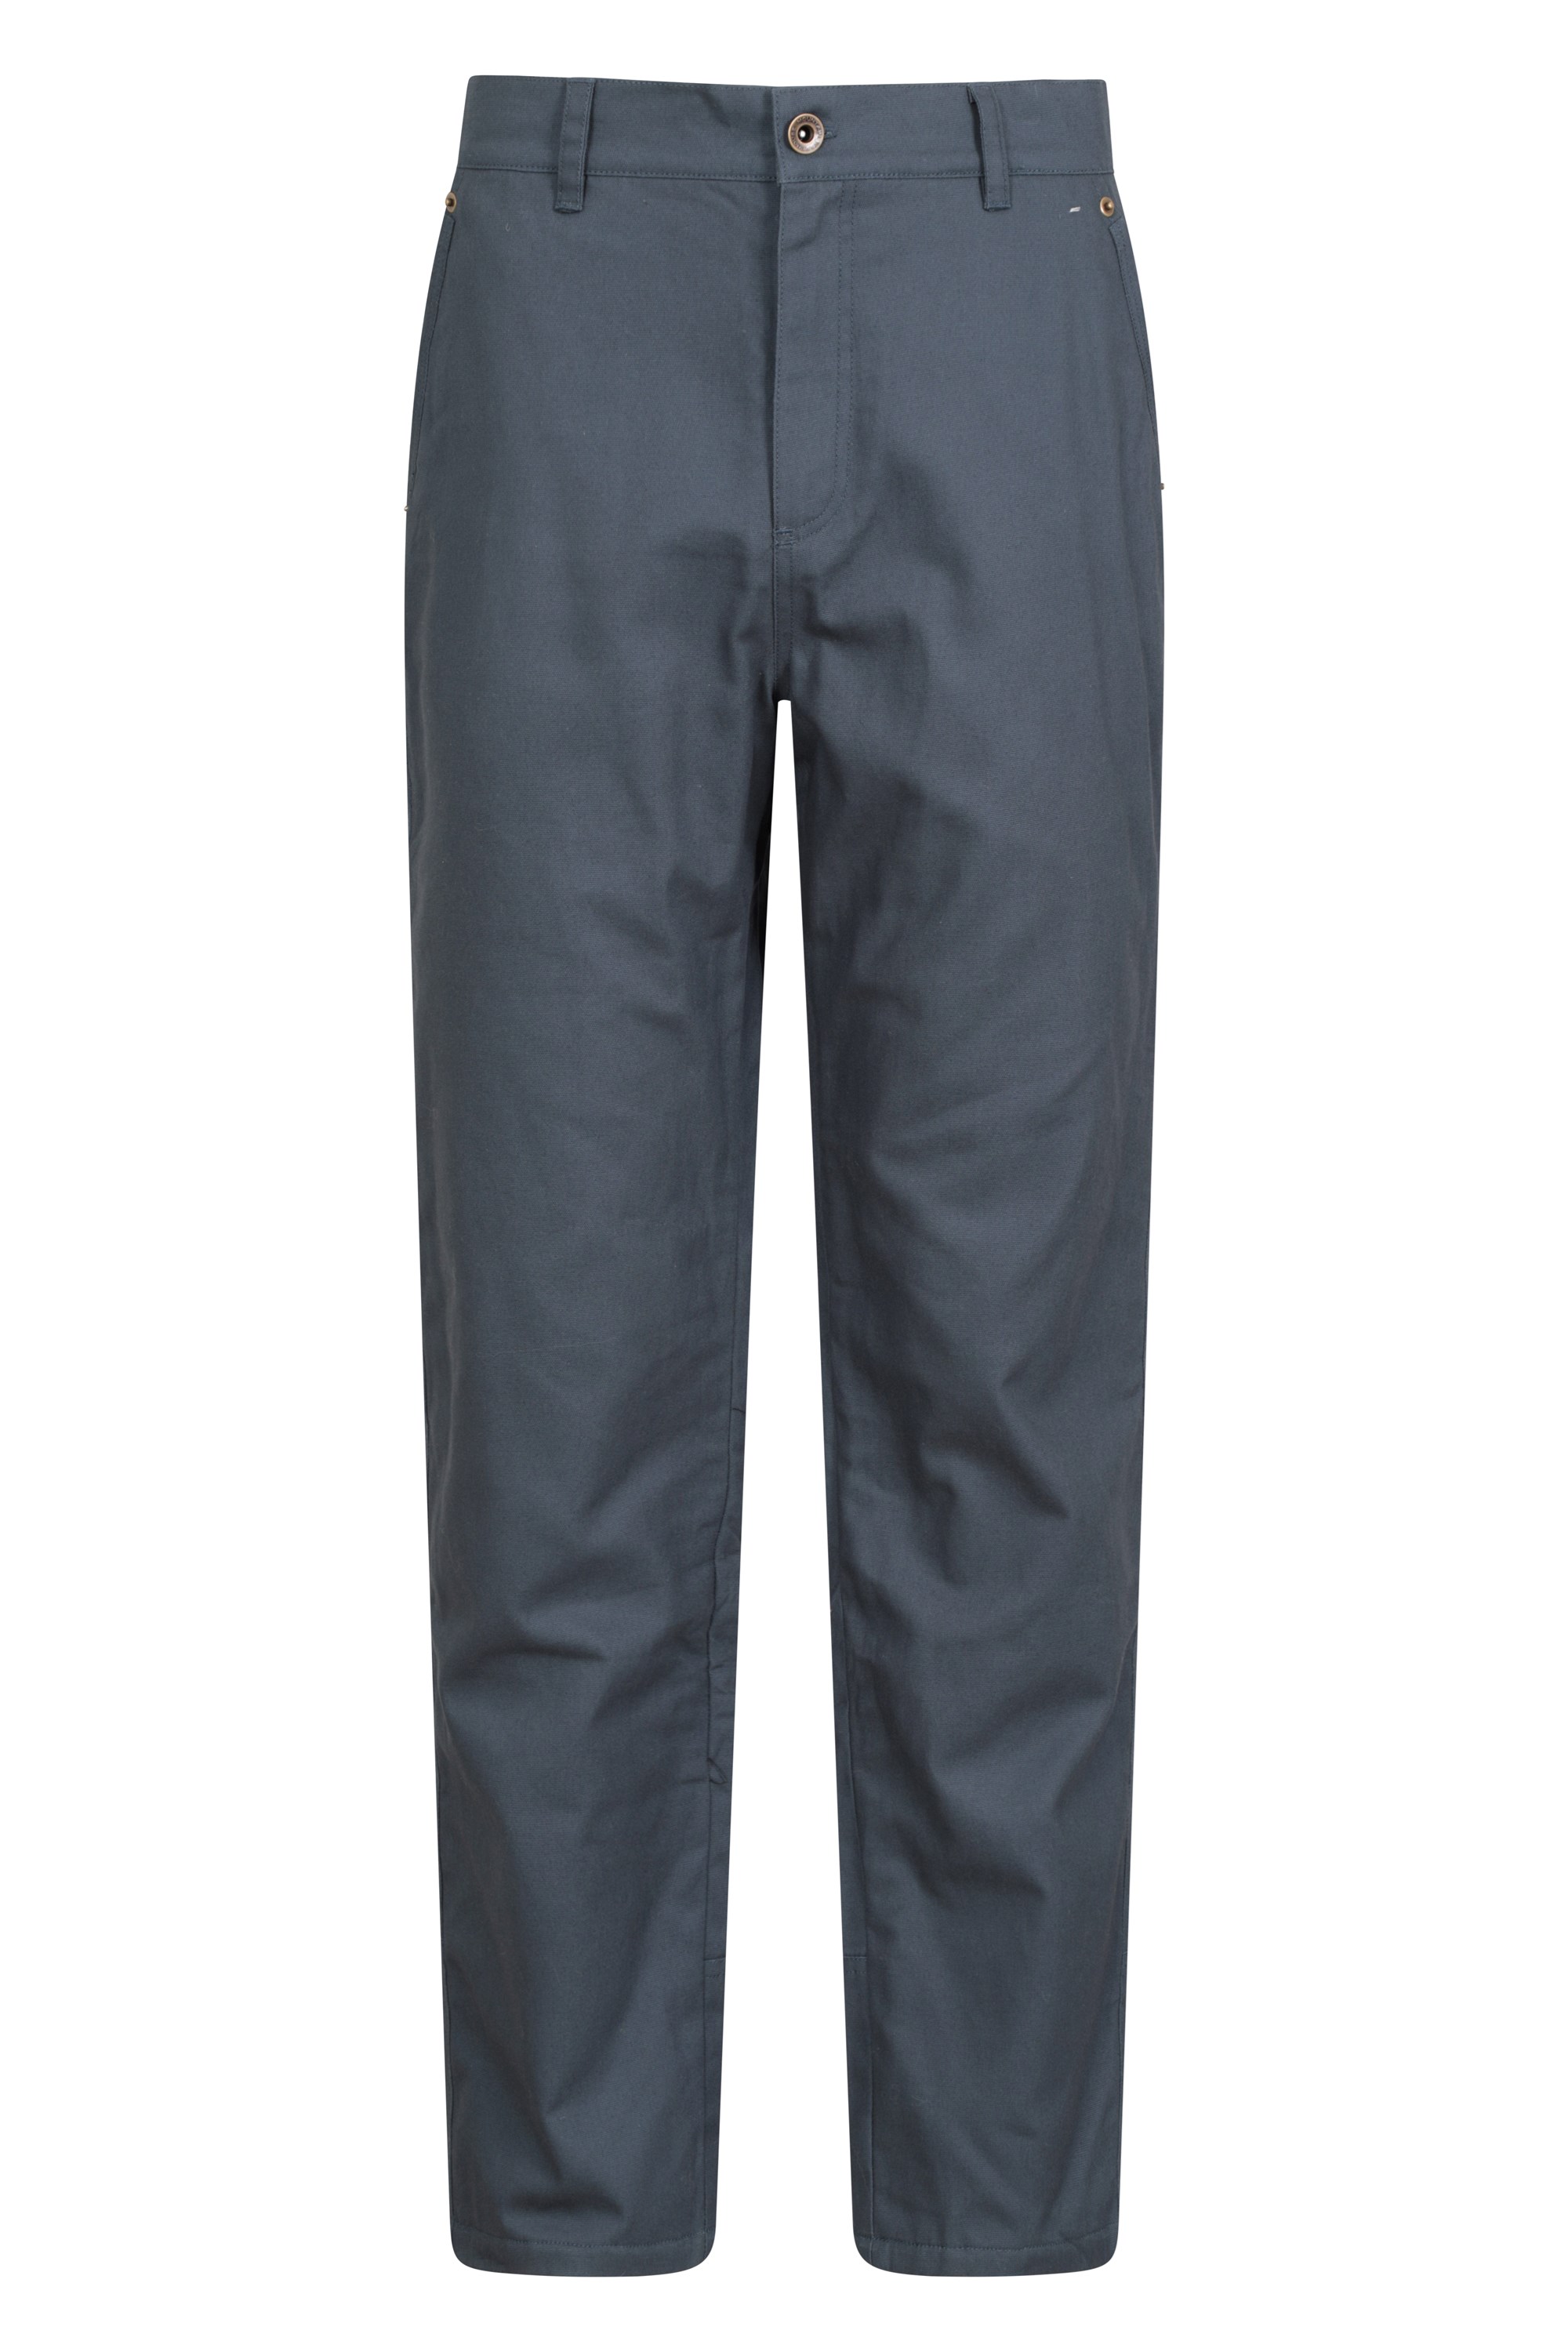 GH Bass Mens Canvas Terrain Stretch Relaxed FITSTRAIGHT Leg Pants Size  36x30 for sale online | eBay